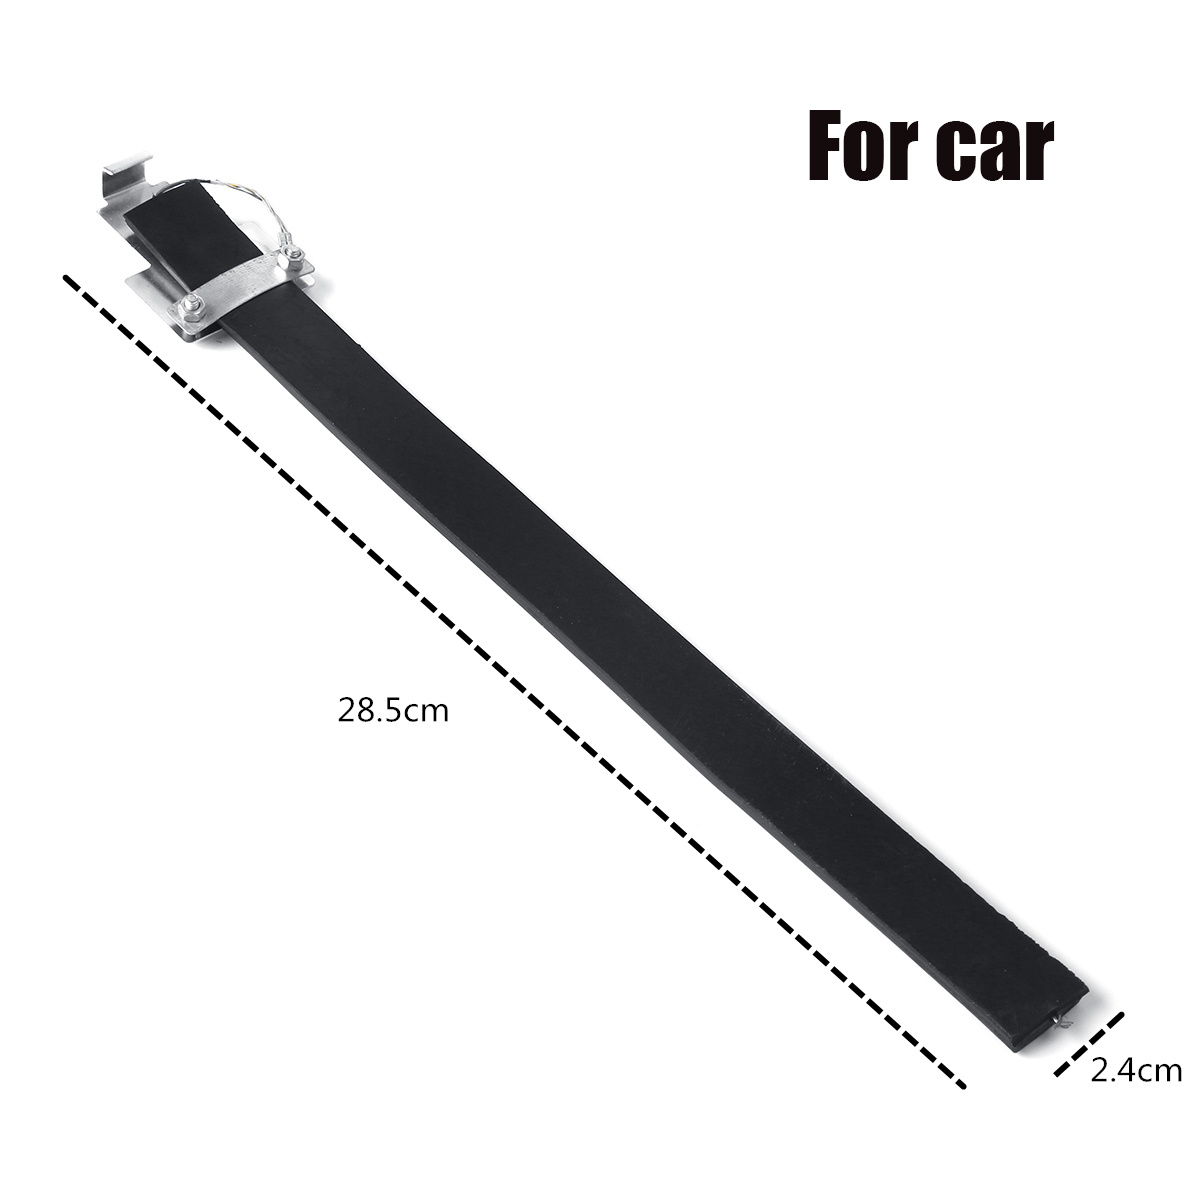 Car-SUV-Safe-Anti-Static-Strip-Earth-Belt-Ground-Wire-Strap-Vehicle-Driving-Tool-Car-Moulding-Trim-S-1518286